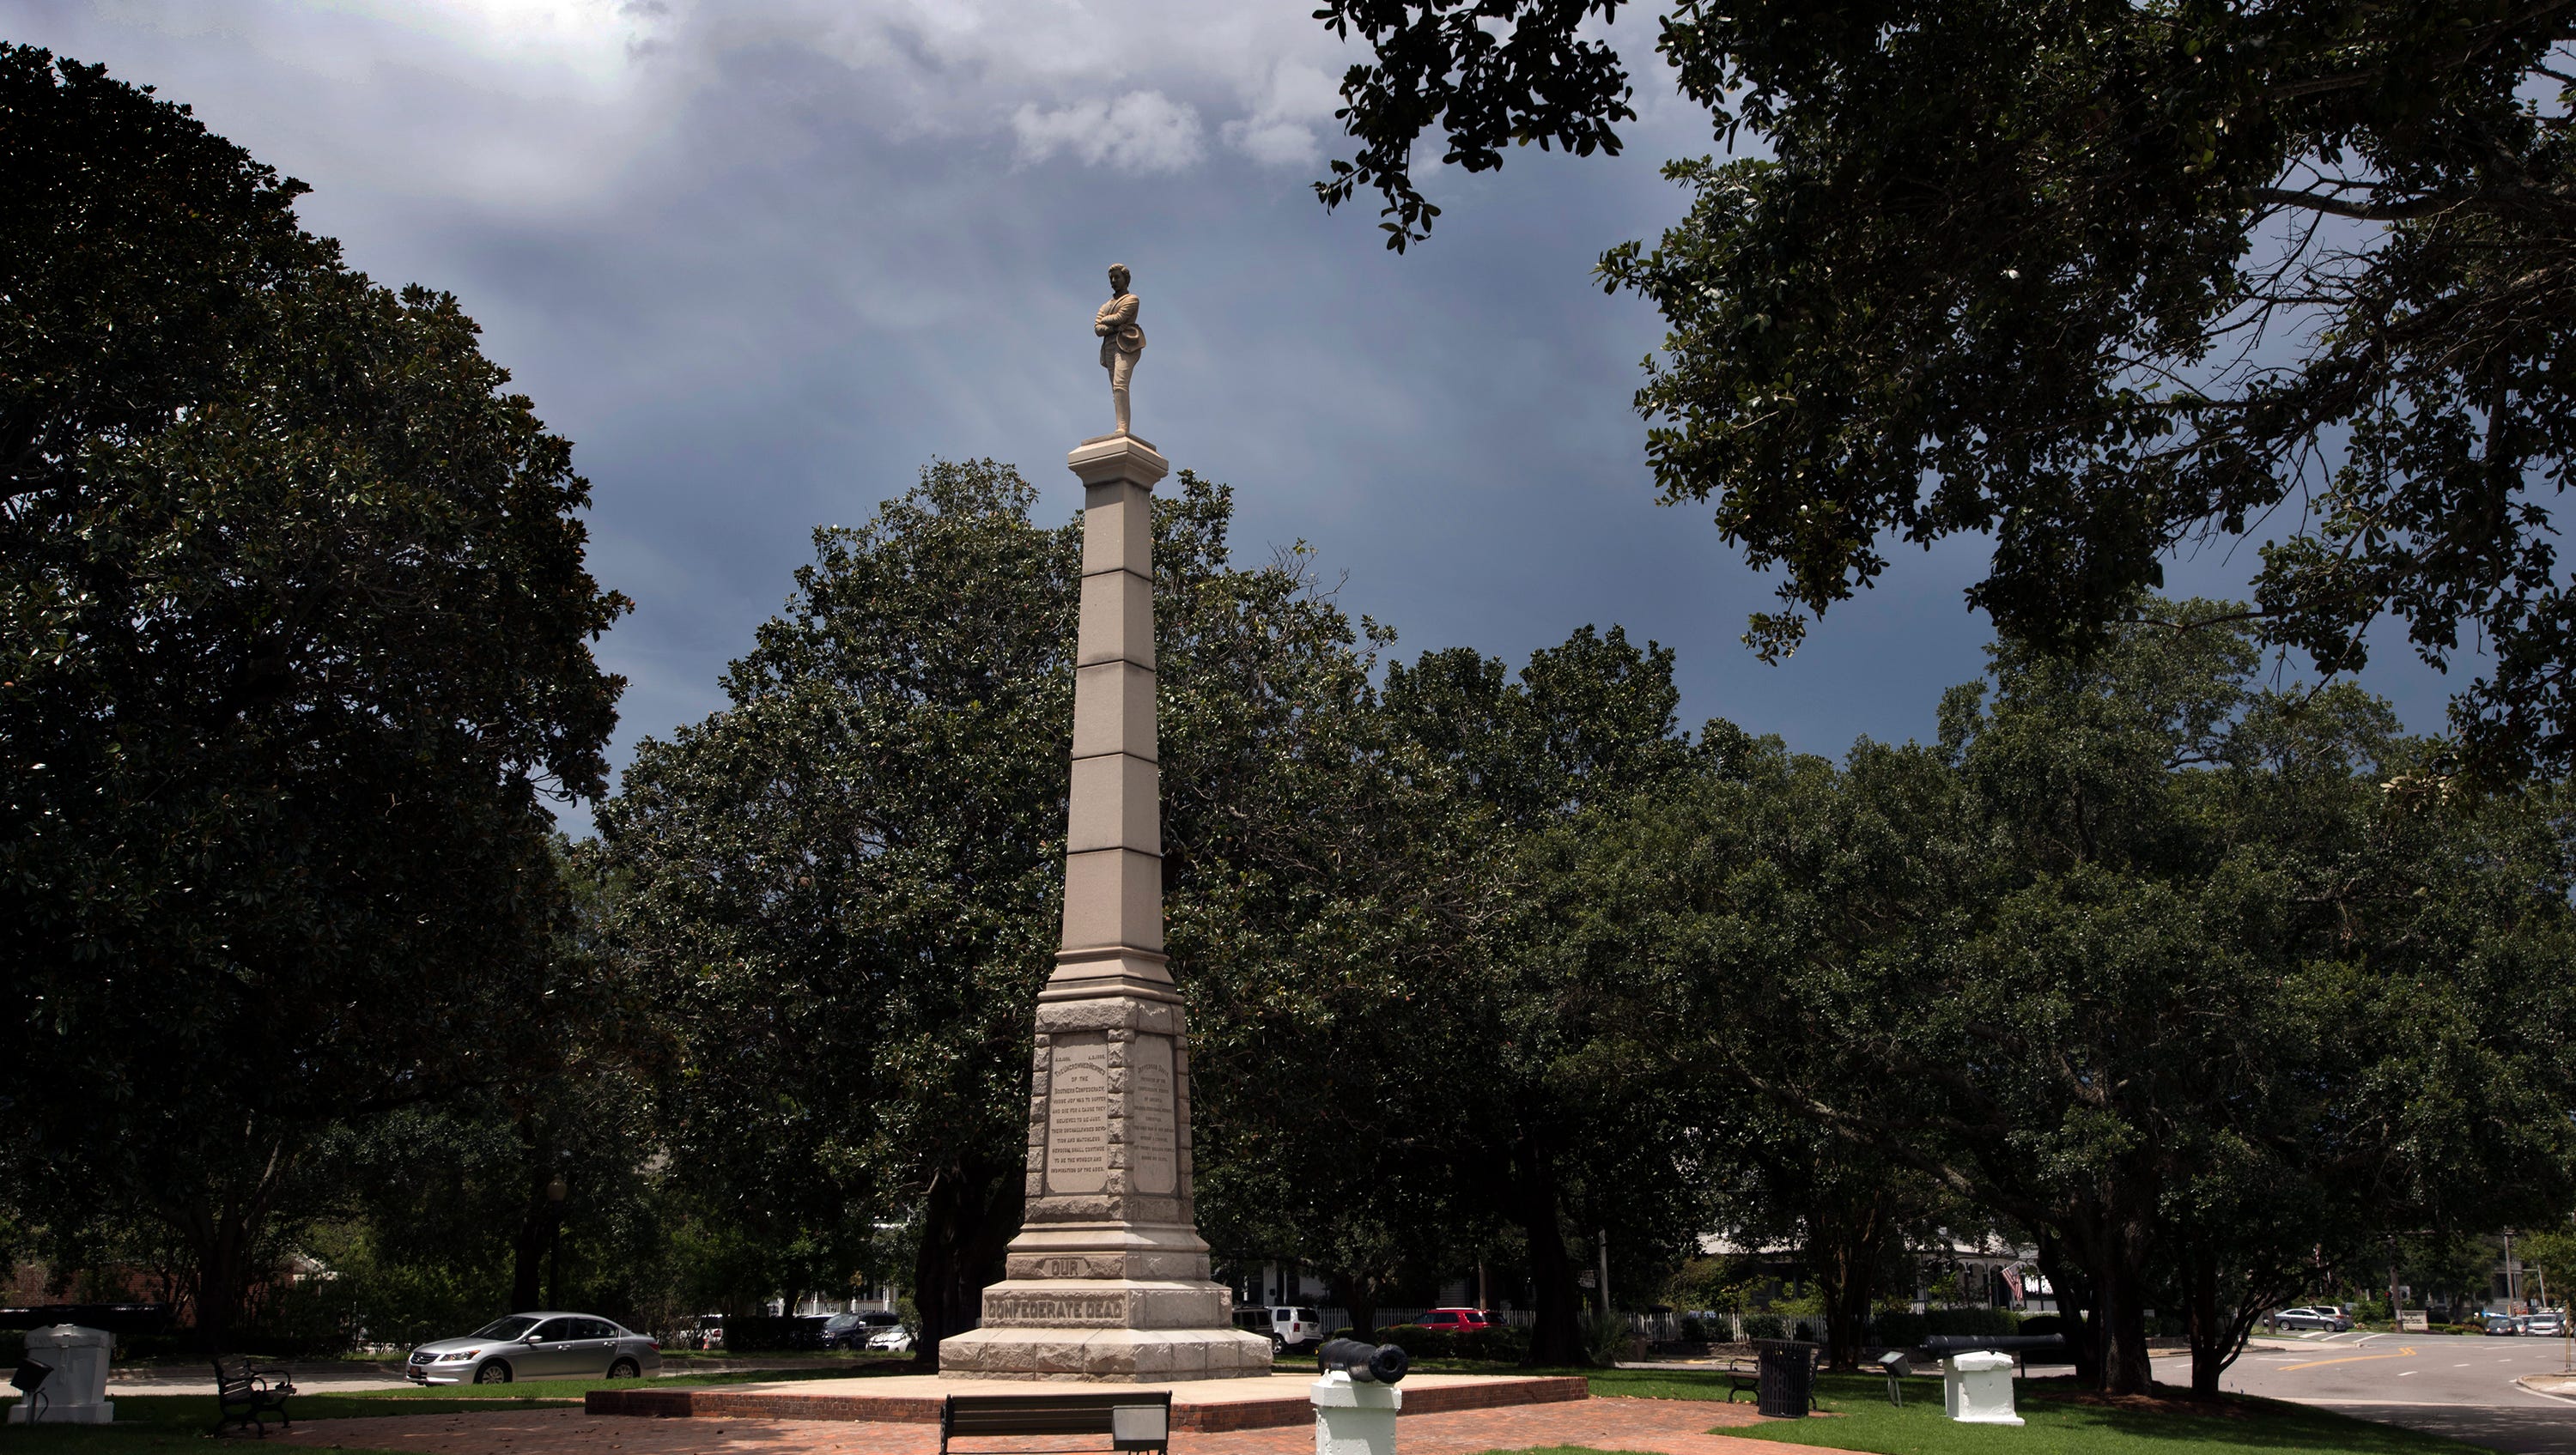 Pensacola mayor: 'Now is not the right time' to remove Confederate ...